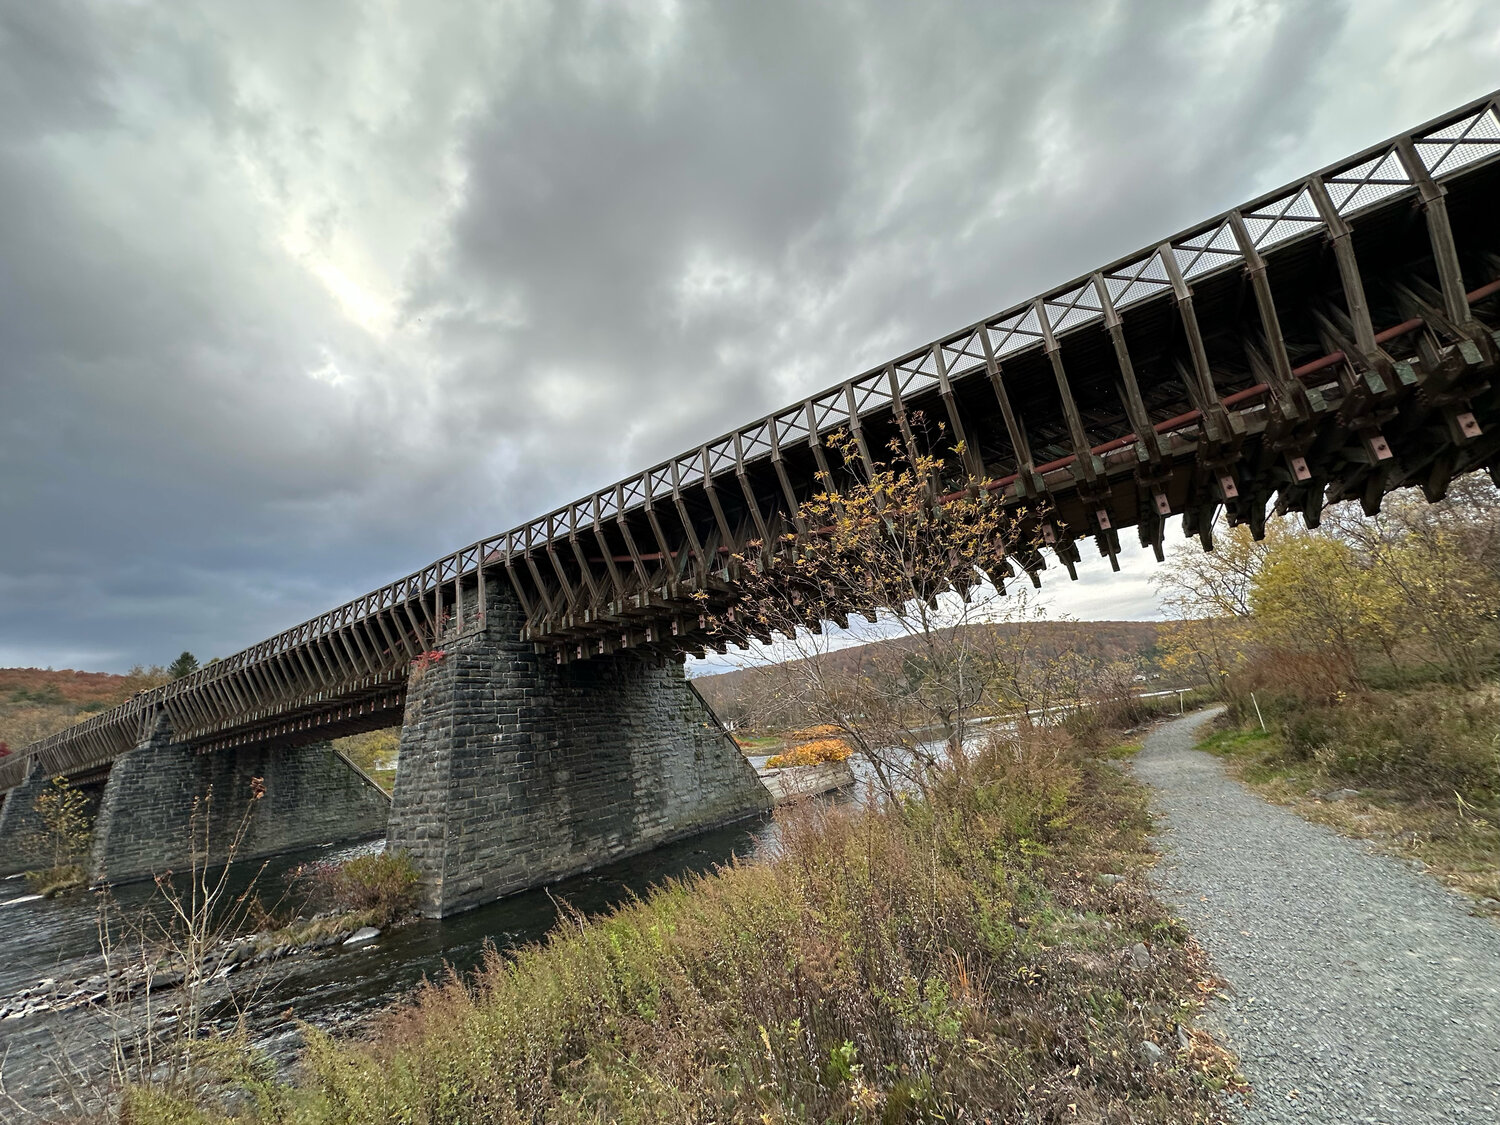 Roebling’s Delaware Aqueduct (now known as the Roebling Bridge) is the oldest existing suspension bridge in the United States. The Delaware & Hudson Canal Towpath Trail runs underneath the bridge and along the Delaware River.